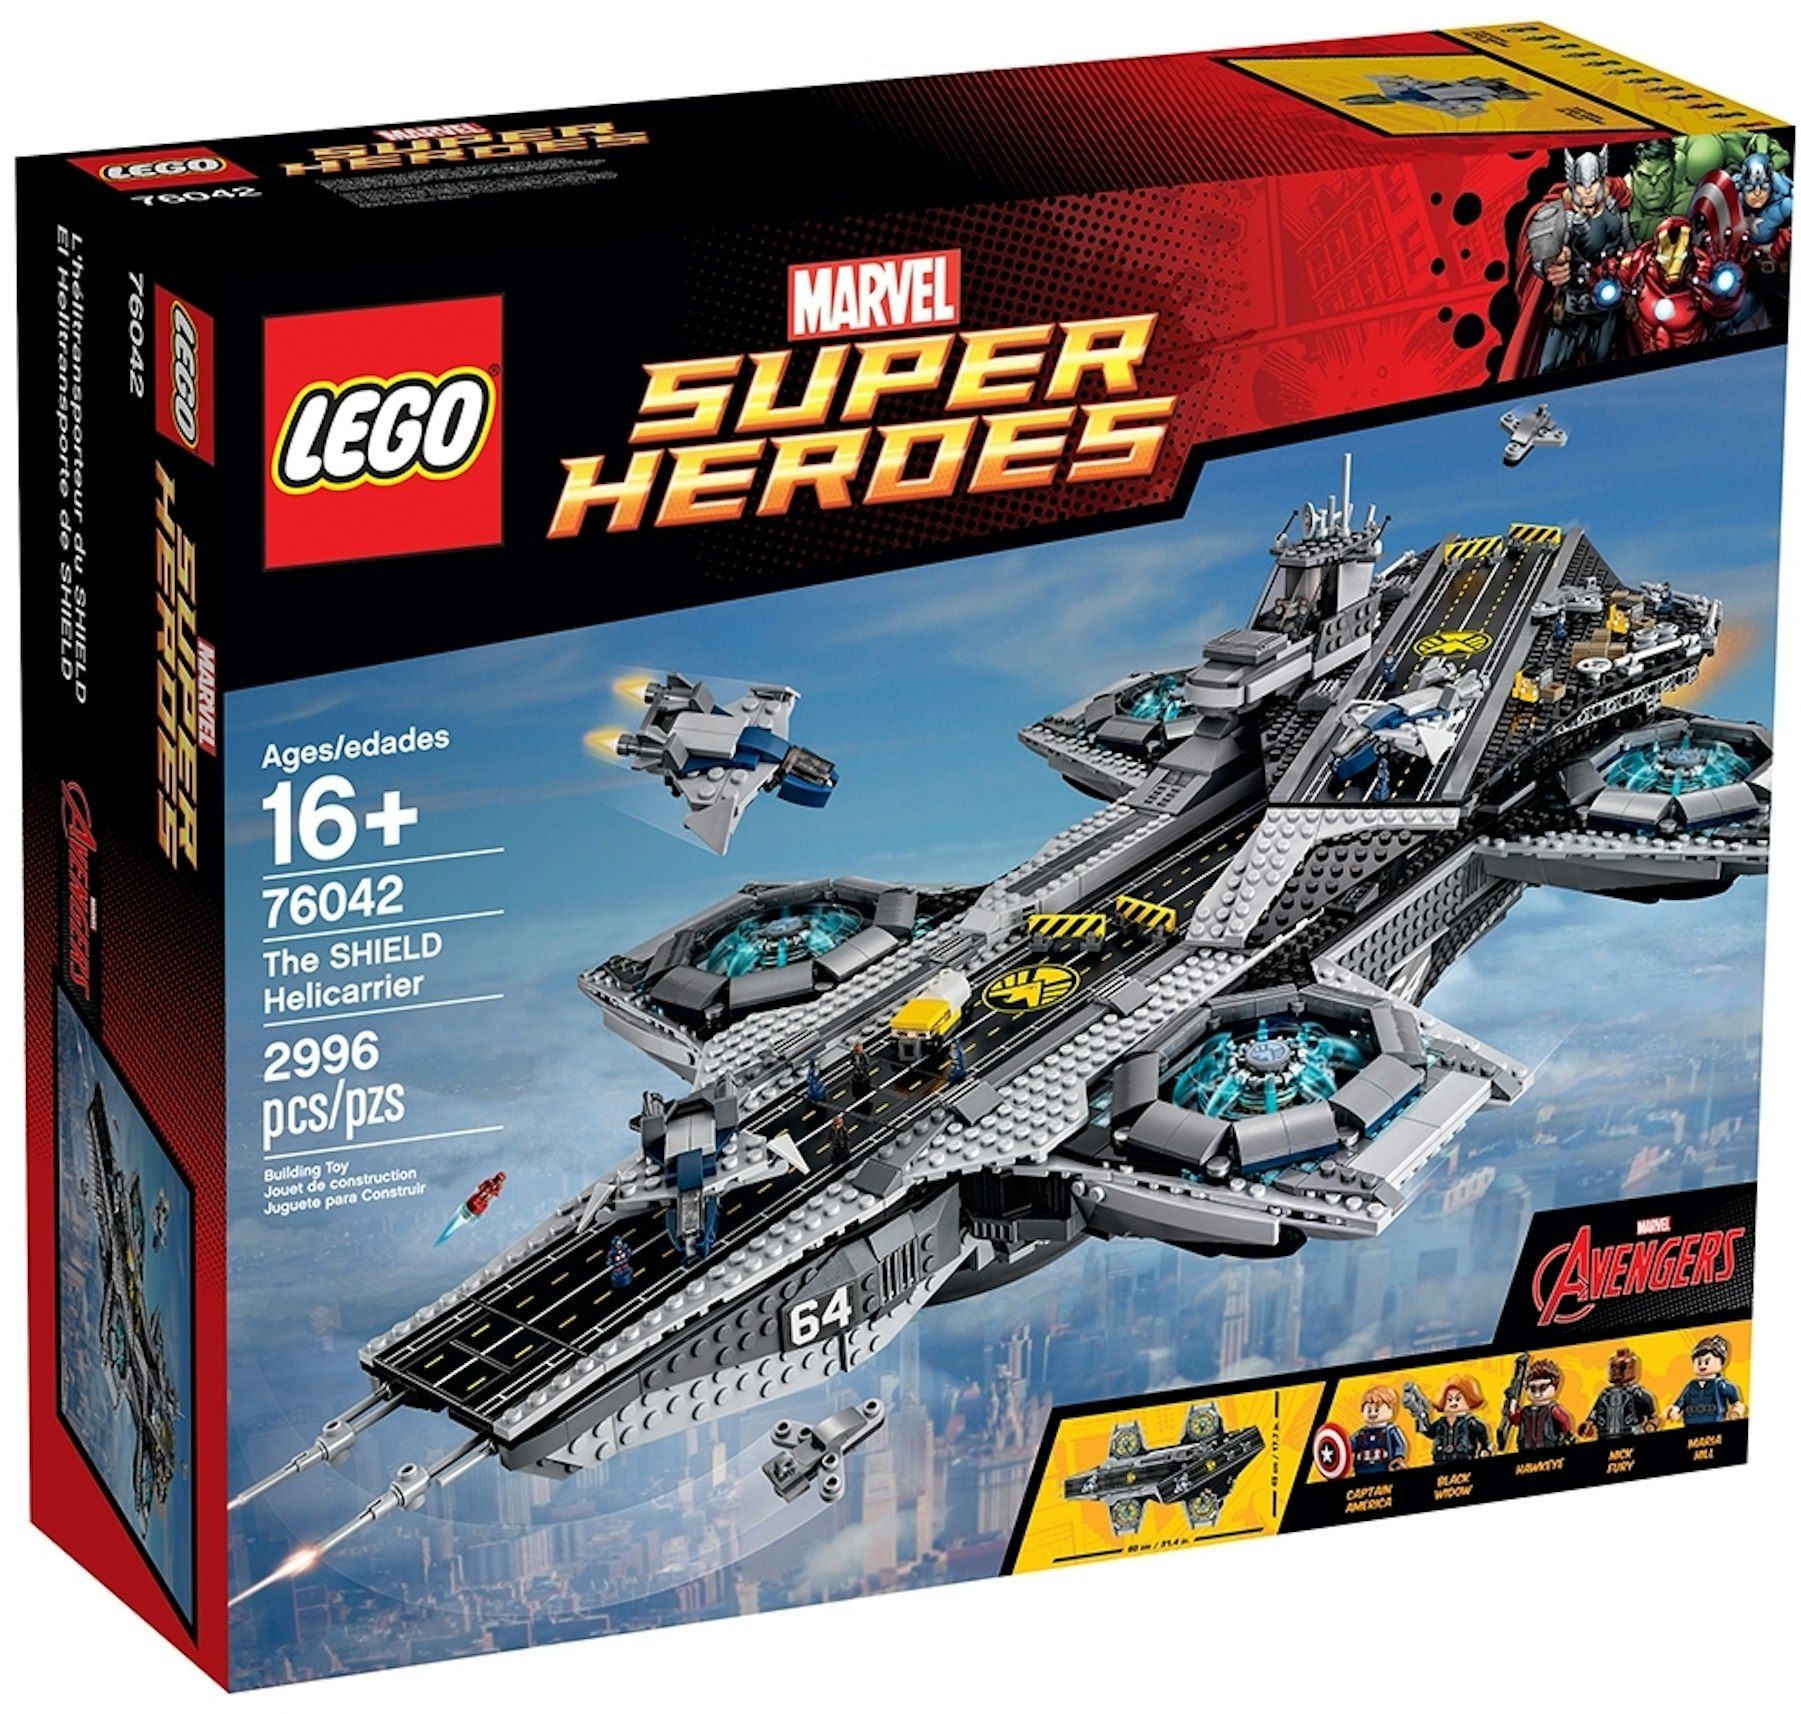 Marvel Super Heroes the SHIELD Helicarrier - US